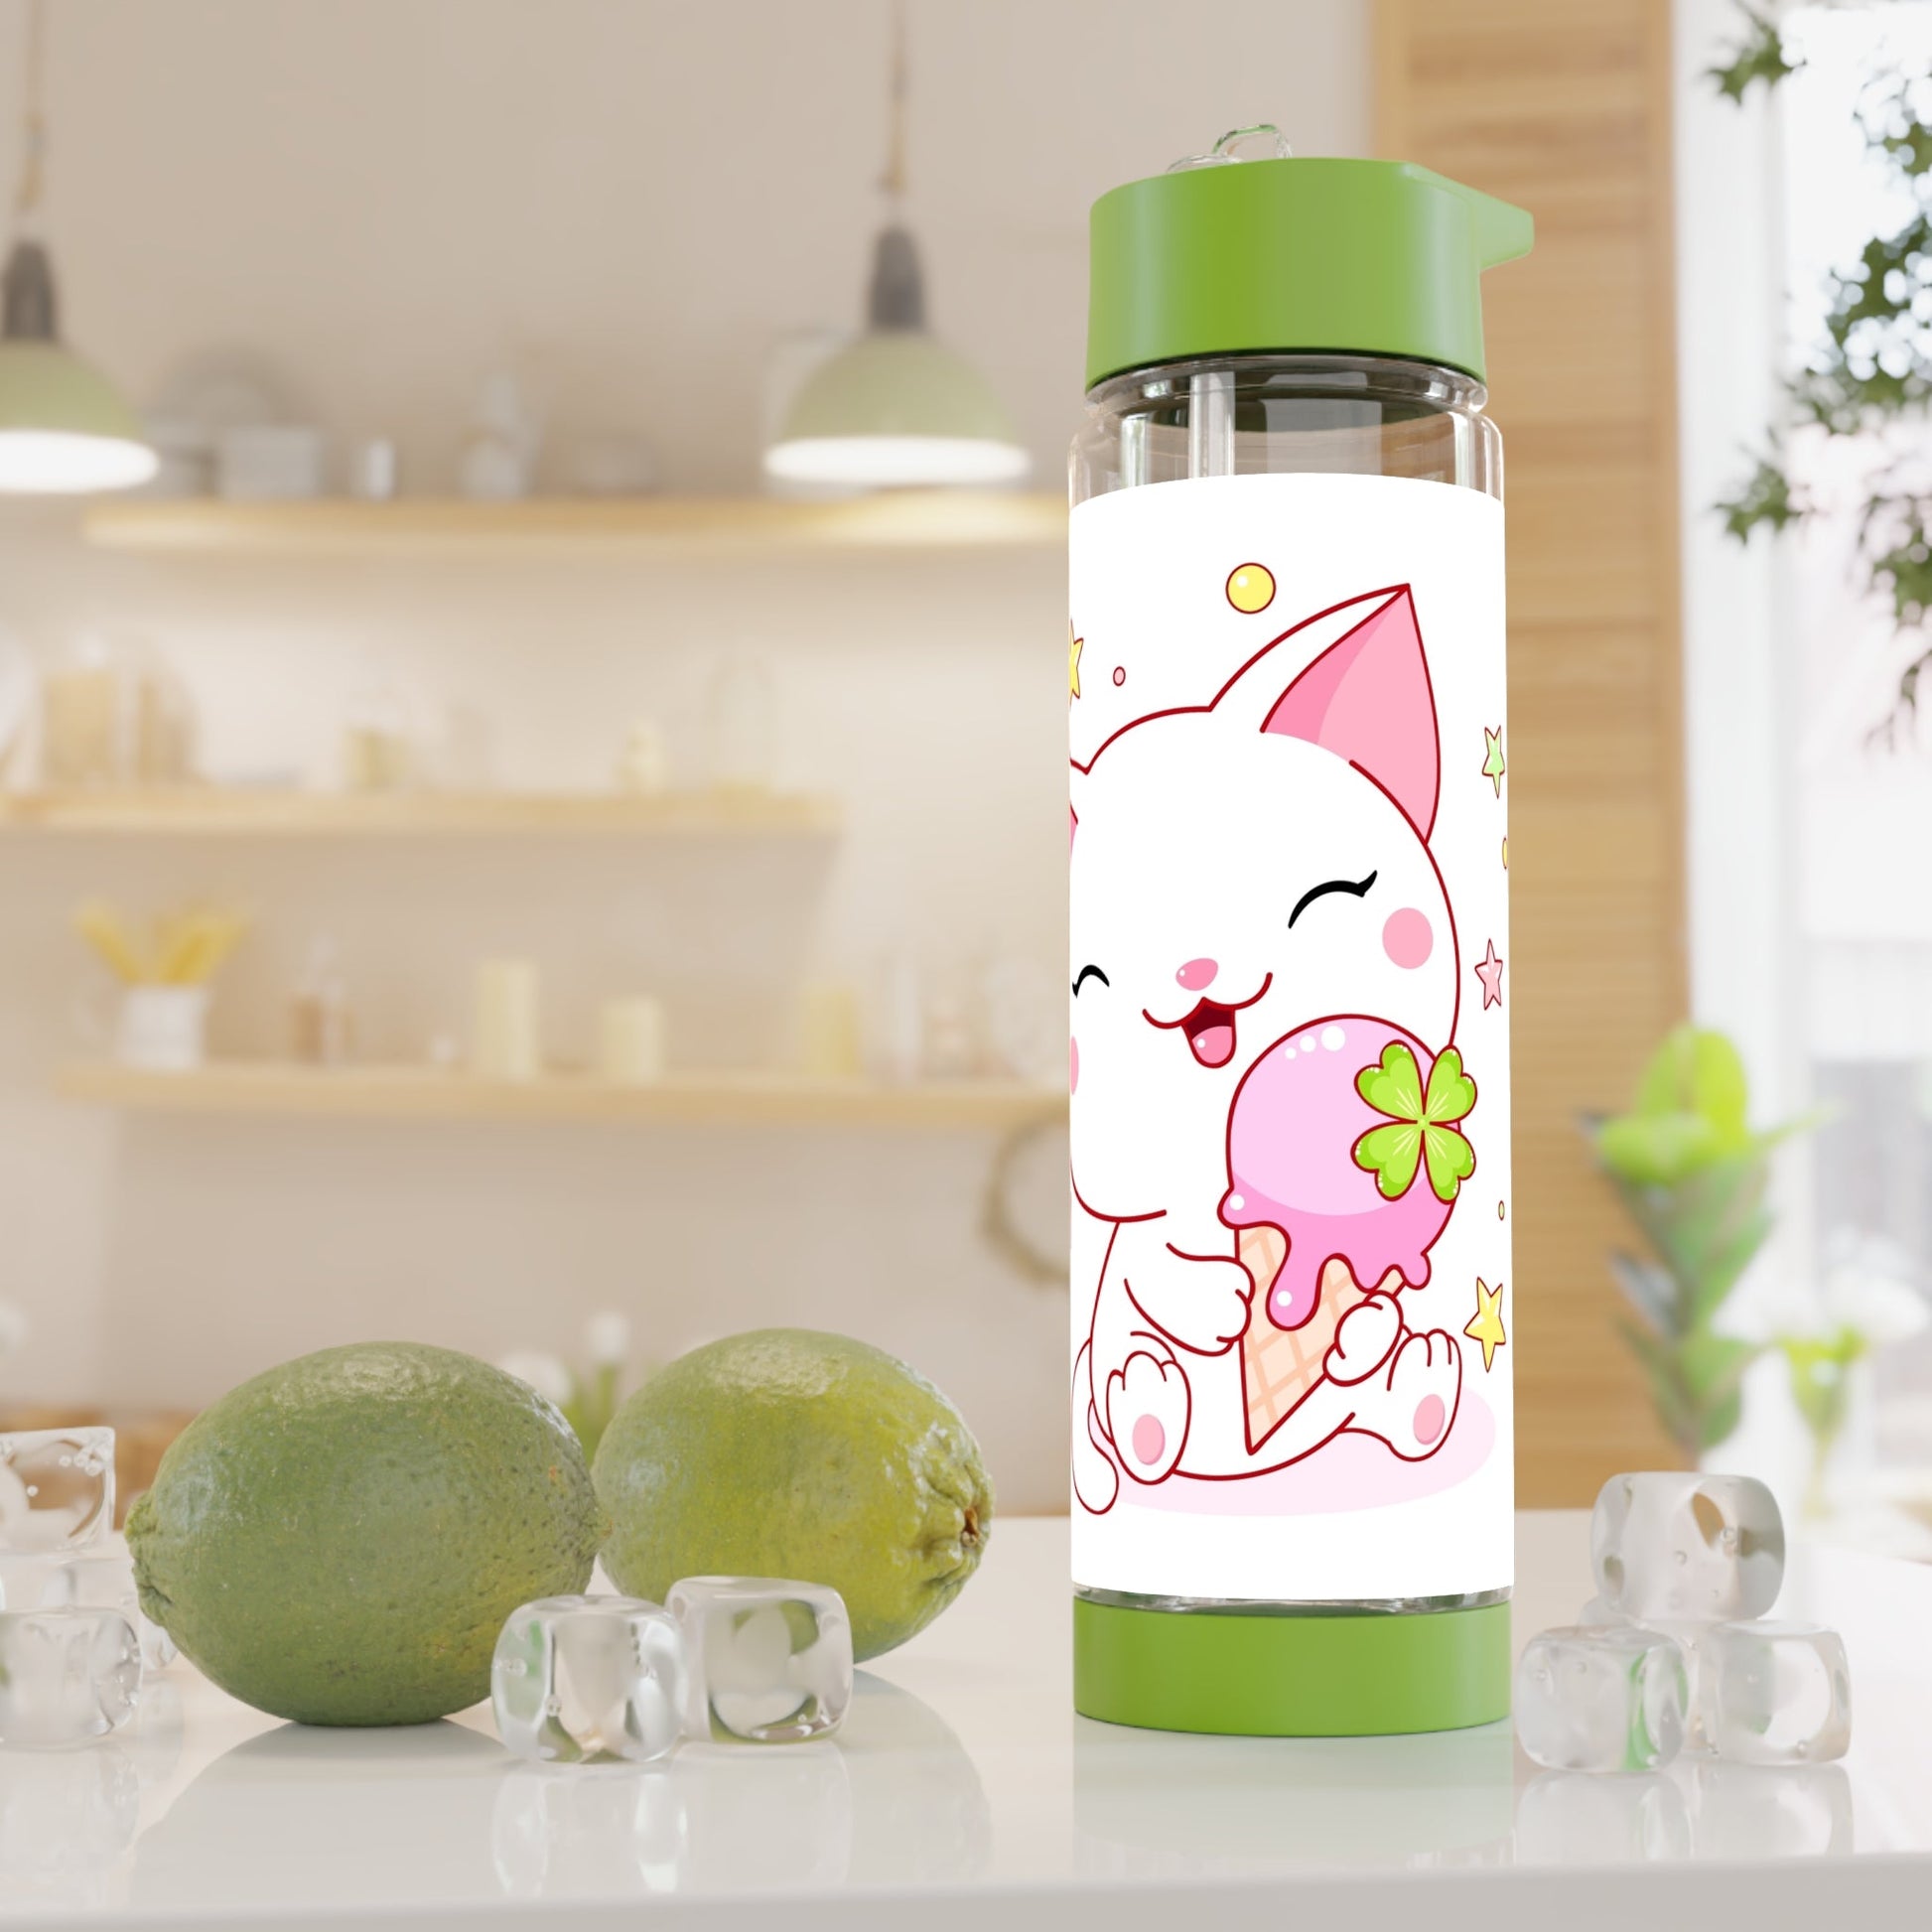 This is a Good Day Infuser Water Bottle - T4x Quadruple Love